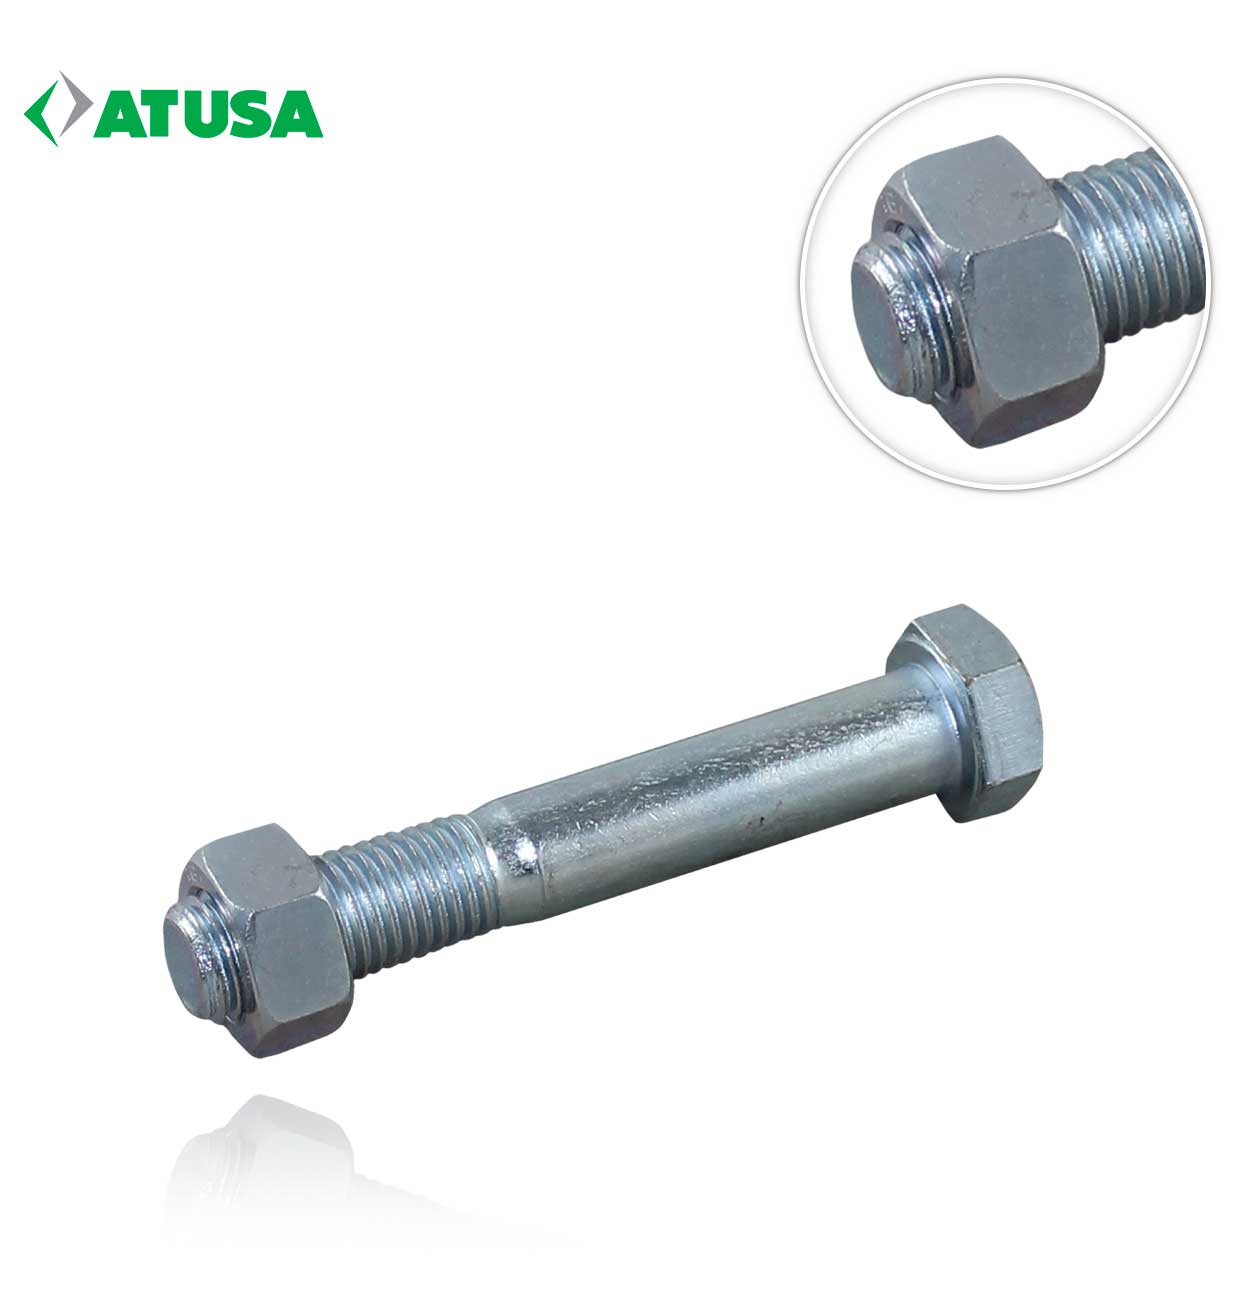 ZINC-PLATED SCREW WITH M16-100 NUT